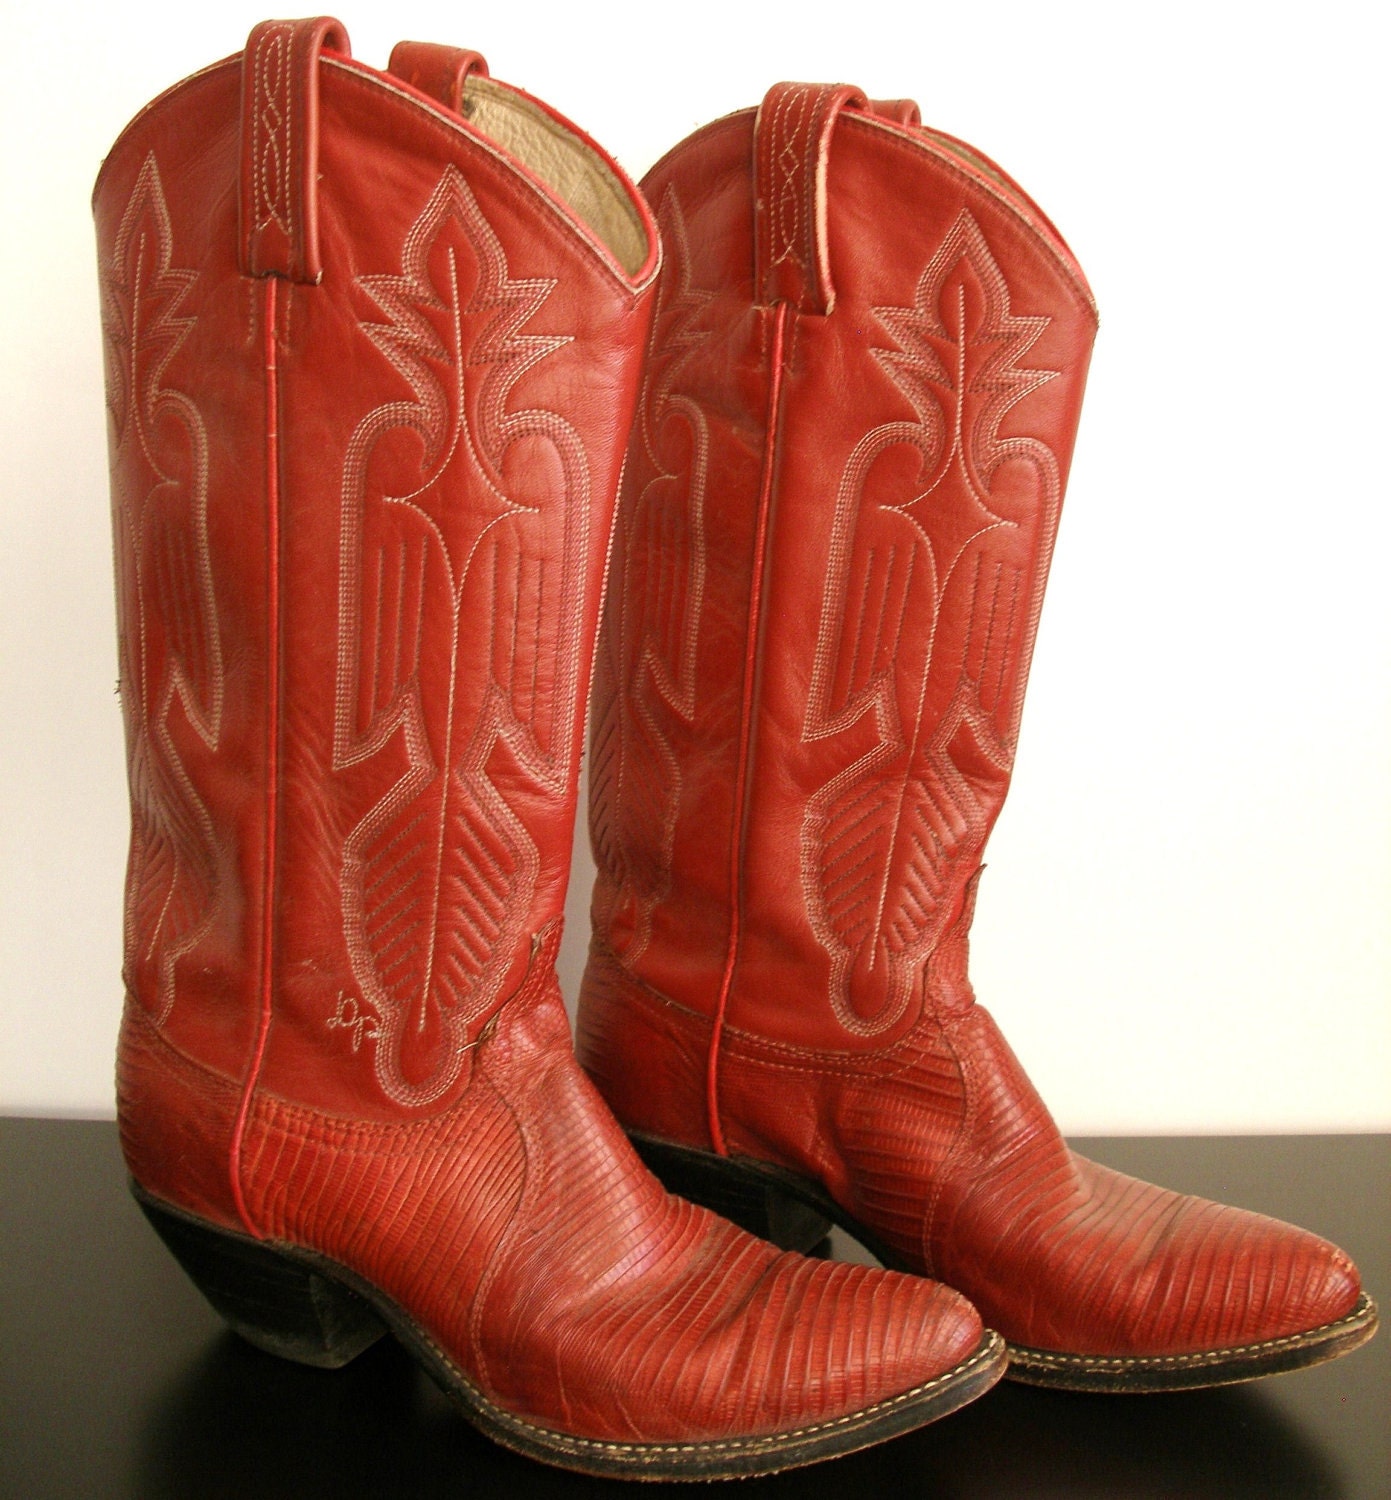 Vintage Cowboy Boots Red Leather & Reptile Skin High Heel